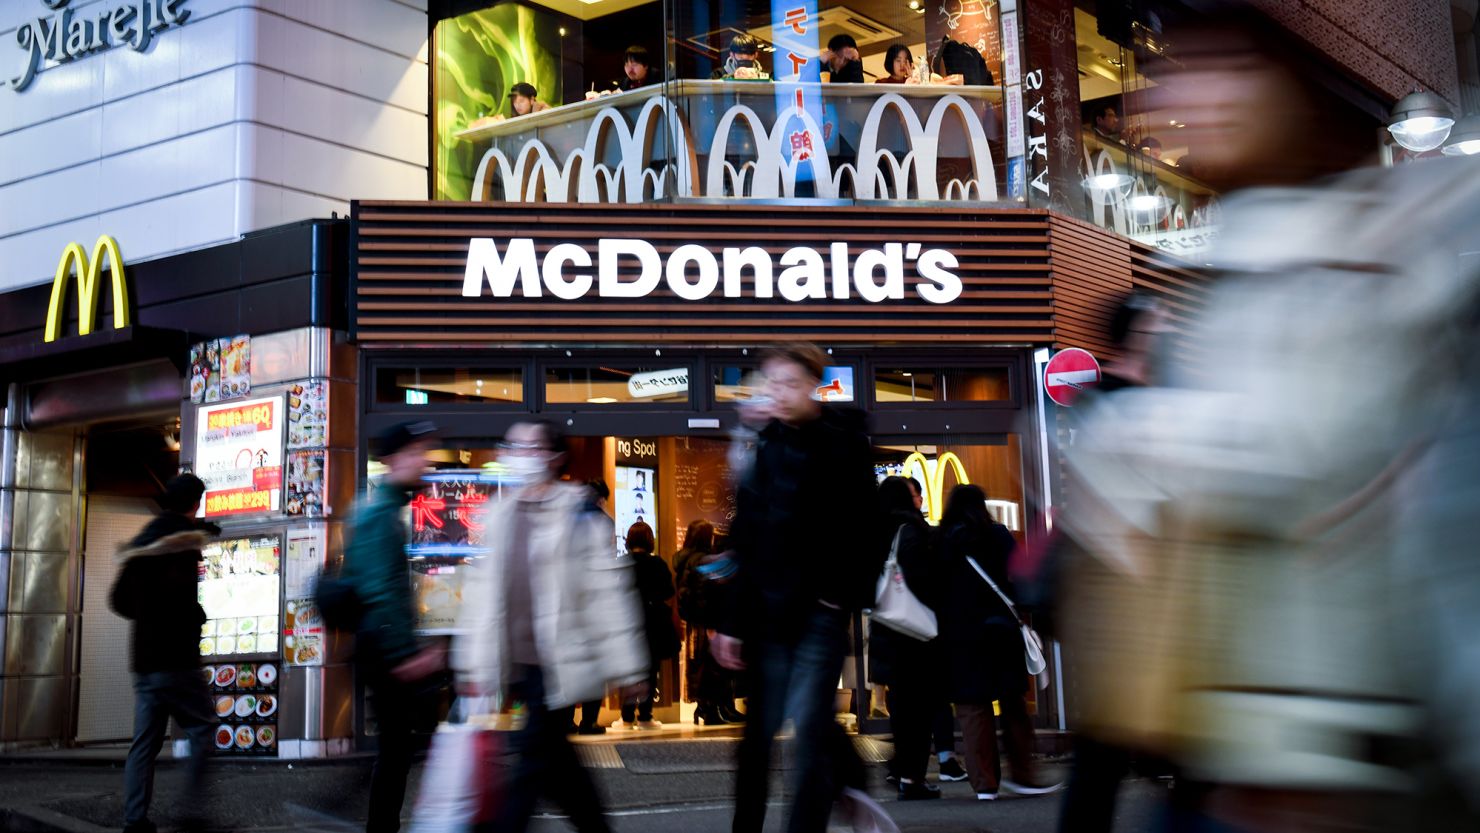 A McDonald's restaurant in Tokyo, pictured in January 2020.